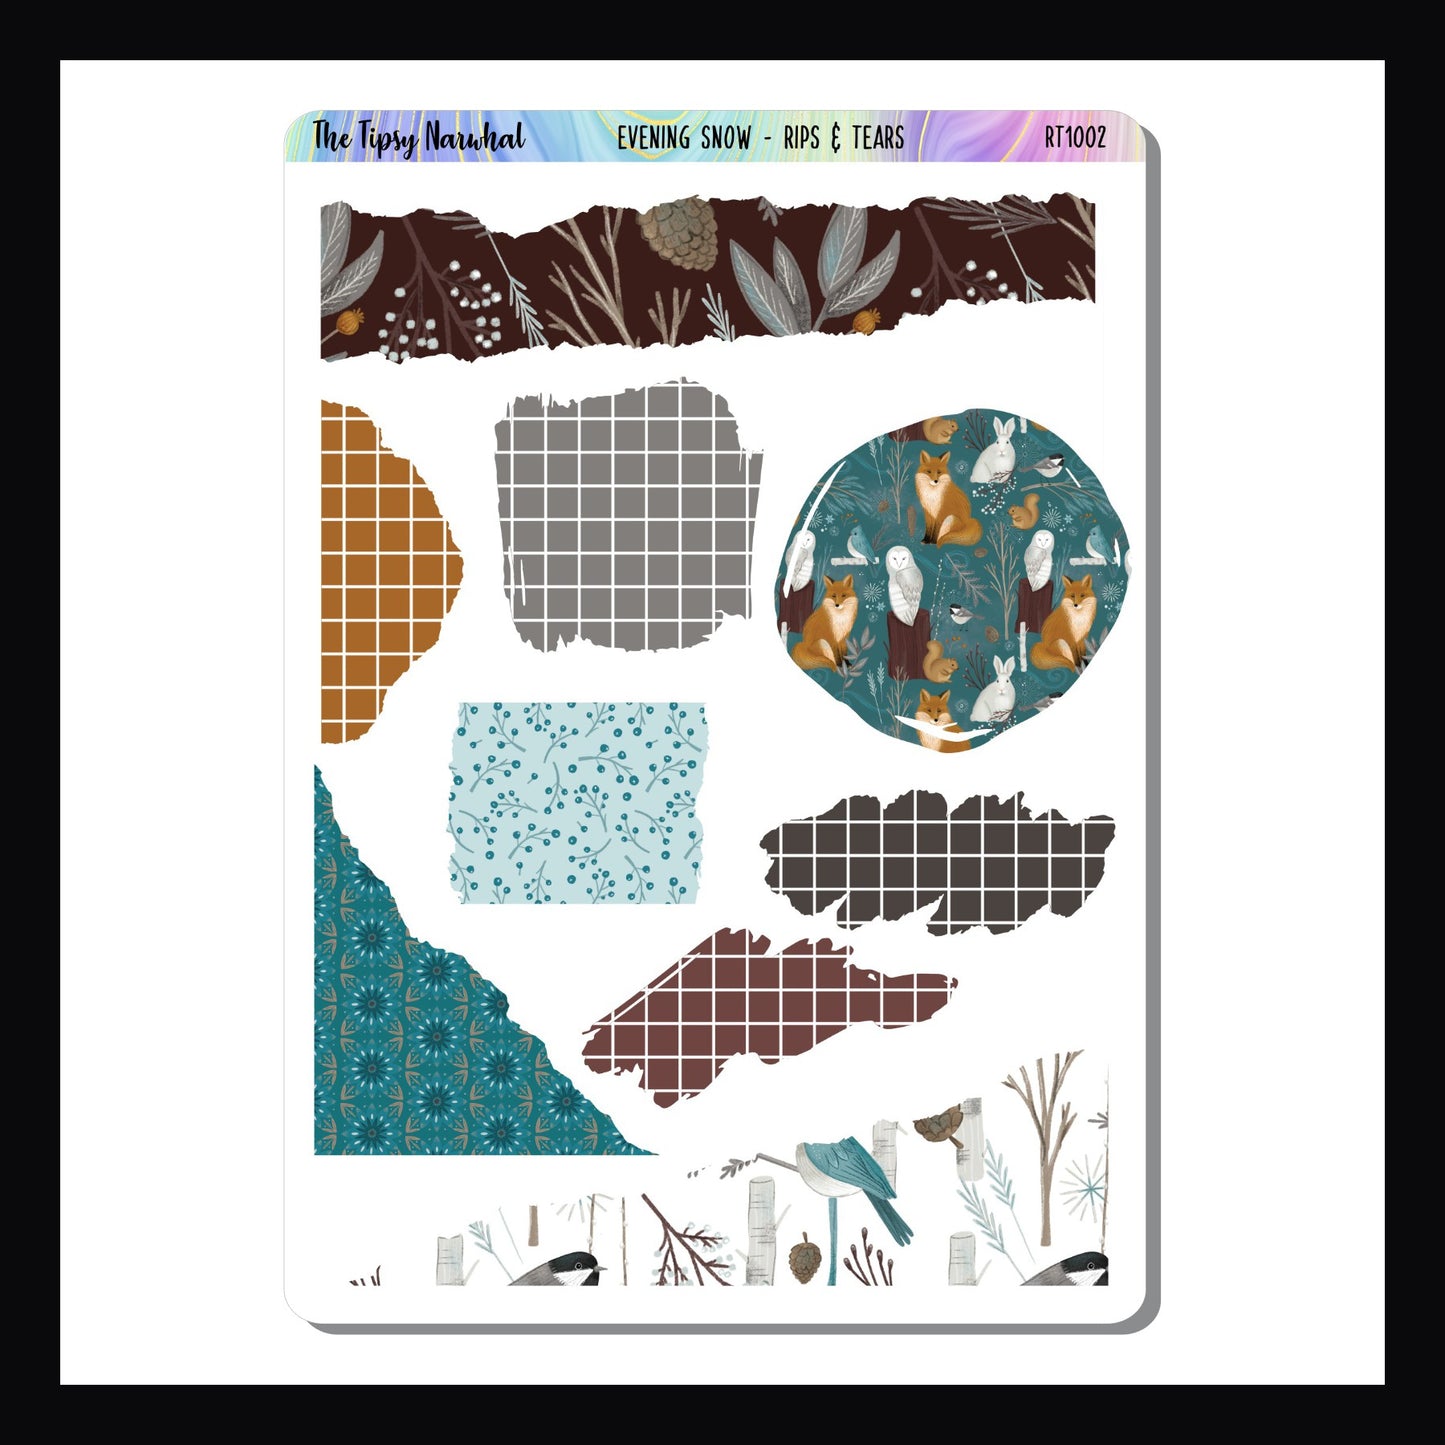 Evening Snow Rips and Tears sheet.  Featuring multiple stickers in various shapes and sizes.  Each sticker coordinates with the Evening Snow kits and features a silhouette do give it a torn paper appearance.